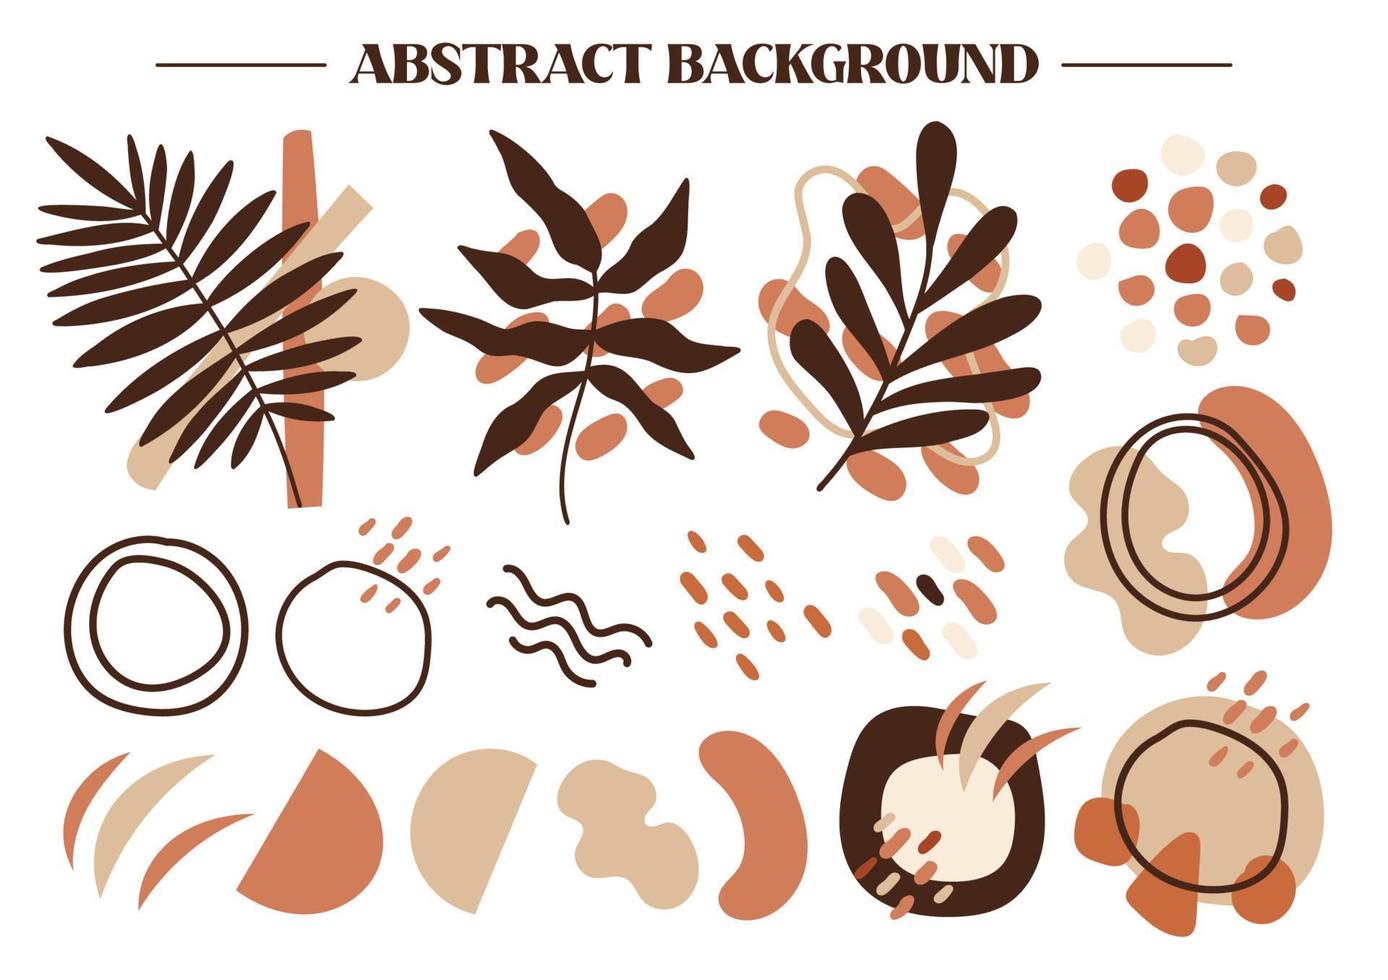 Abstract shape vector illustration for banner